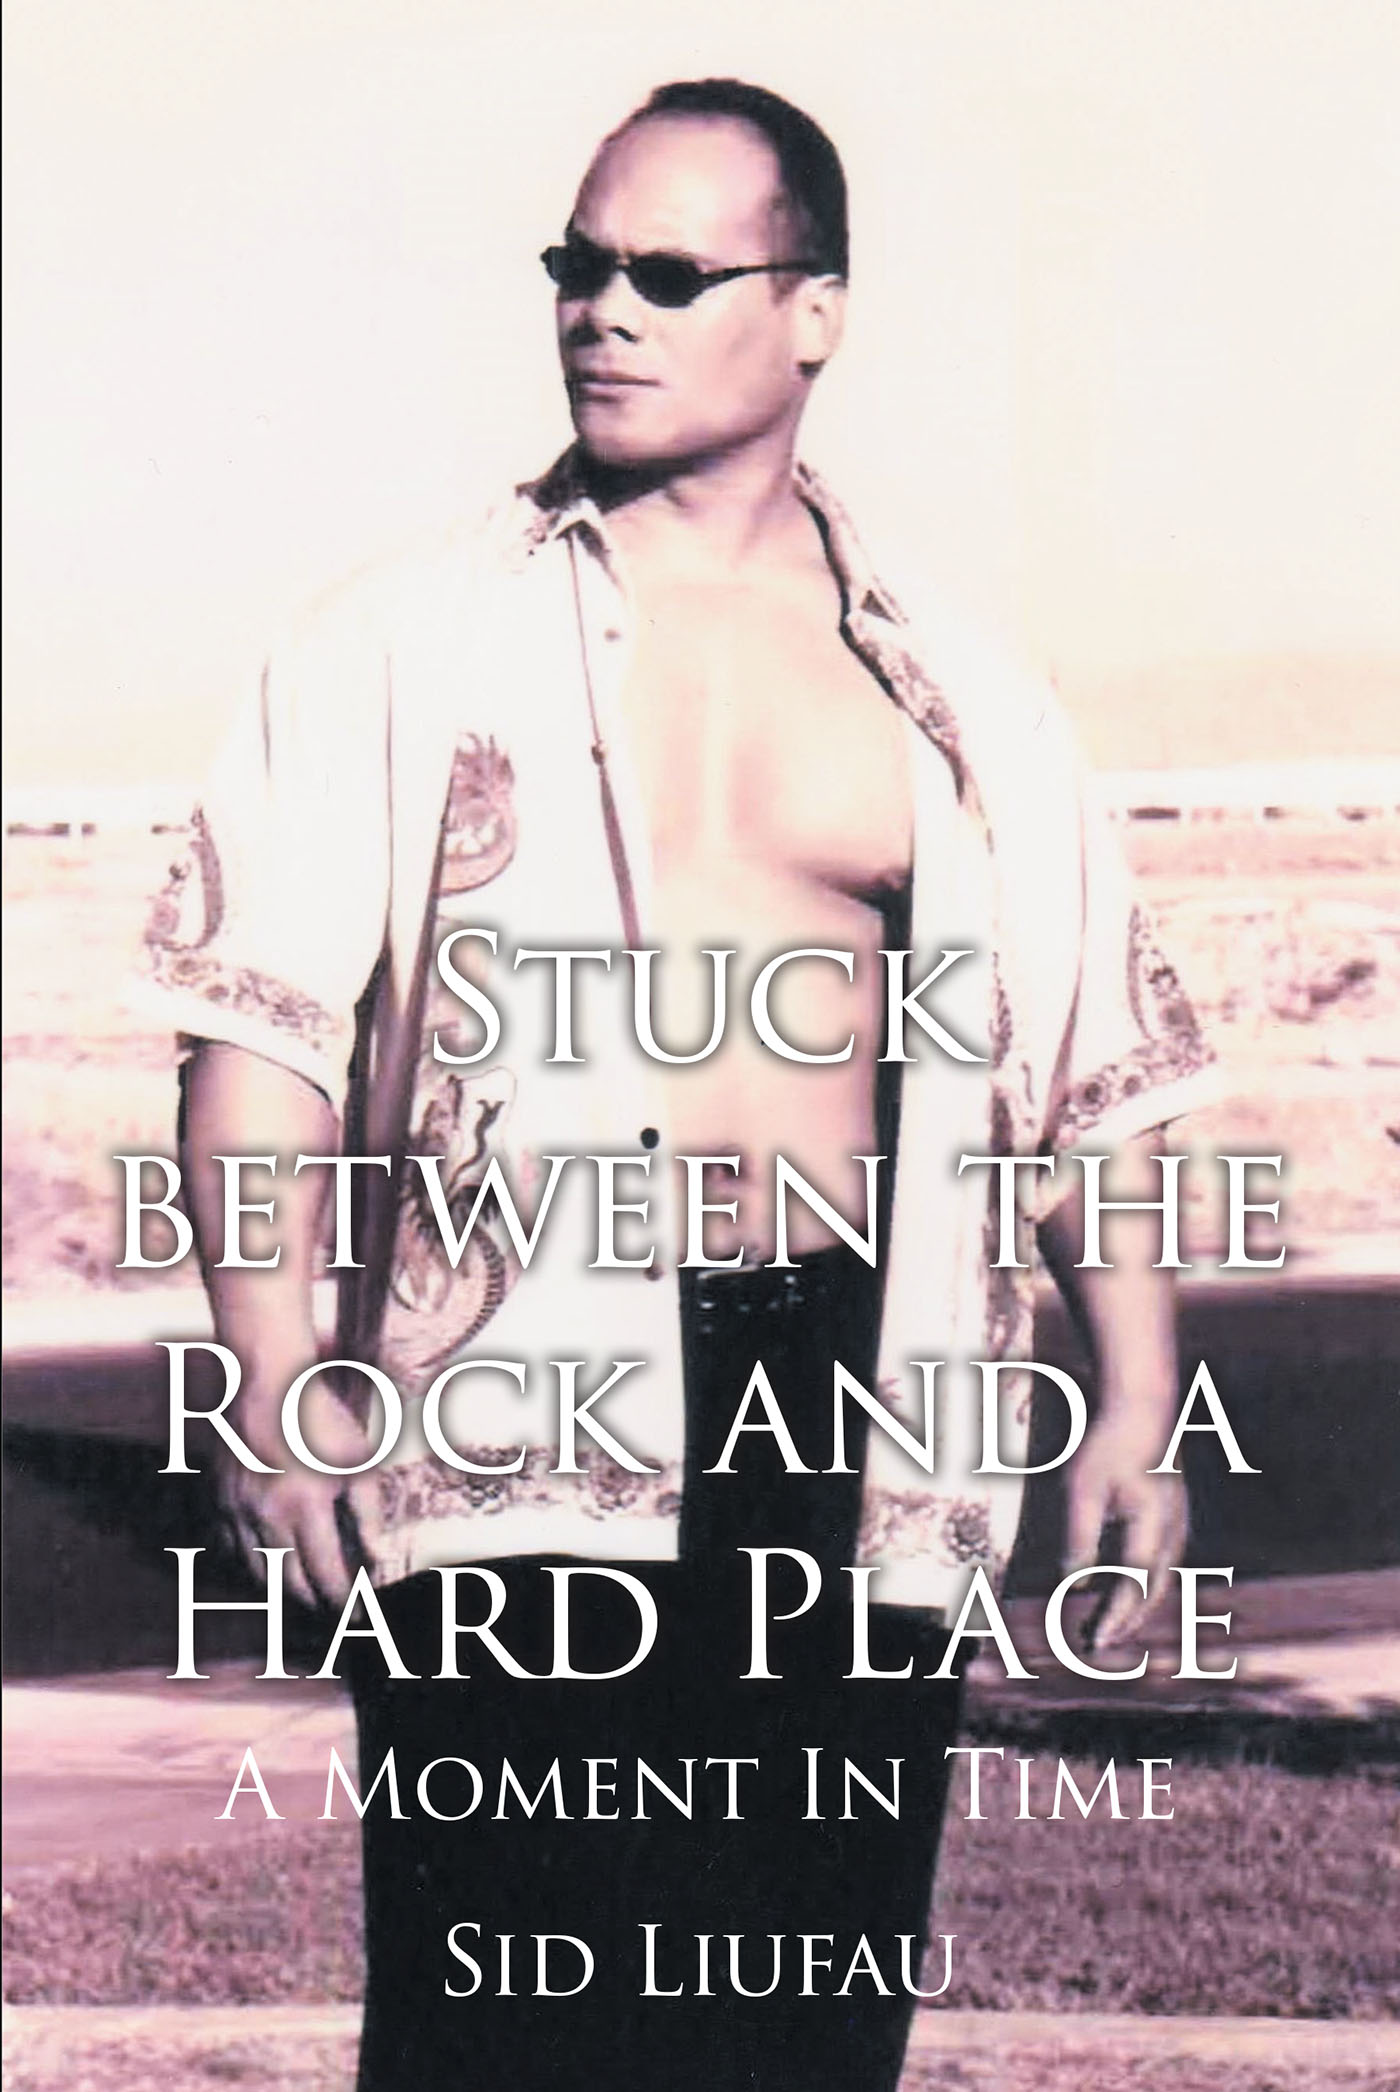 Author Sid Liufau’s new book, “Stuck between the Rock and a Hard Place,” Recounts How the Author’s Faith Helped Him Weather Every Storm Throughout His Acting Career